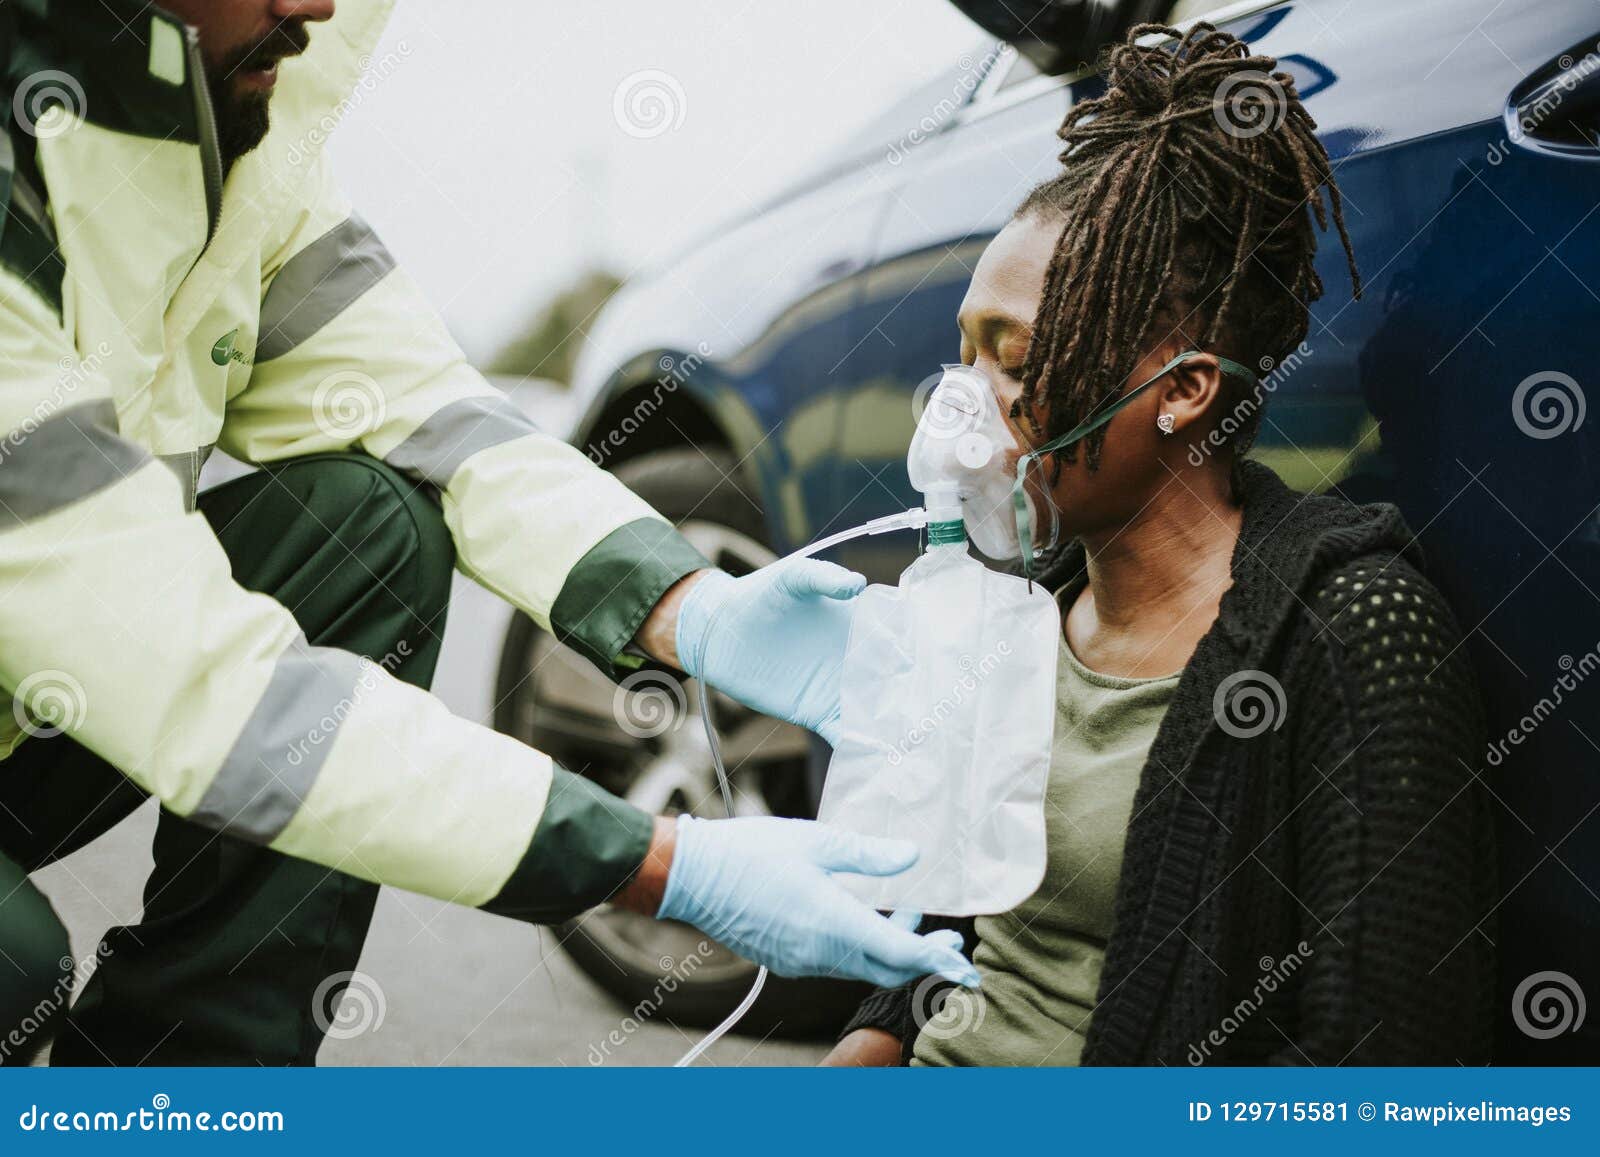 male paramedic putting on an oxygen mask to an injured woman on a road